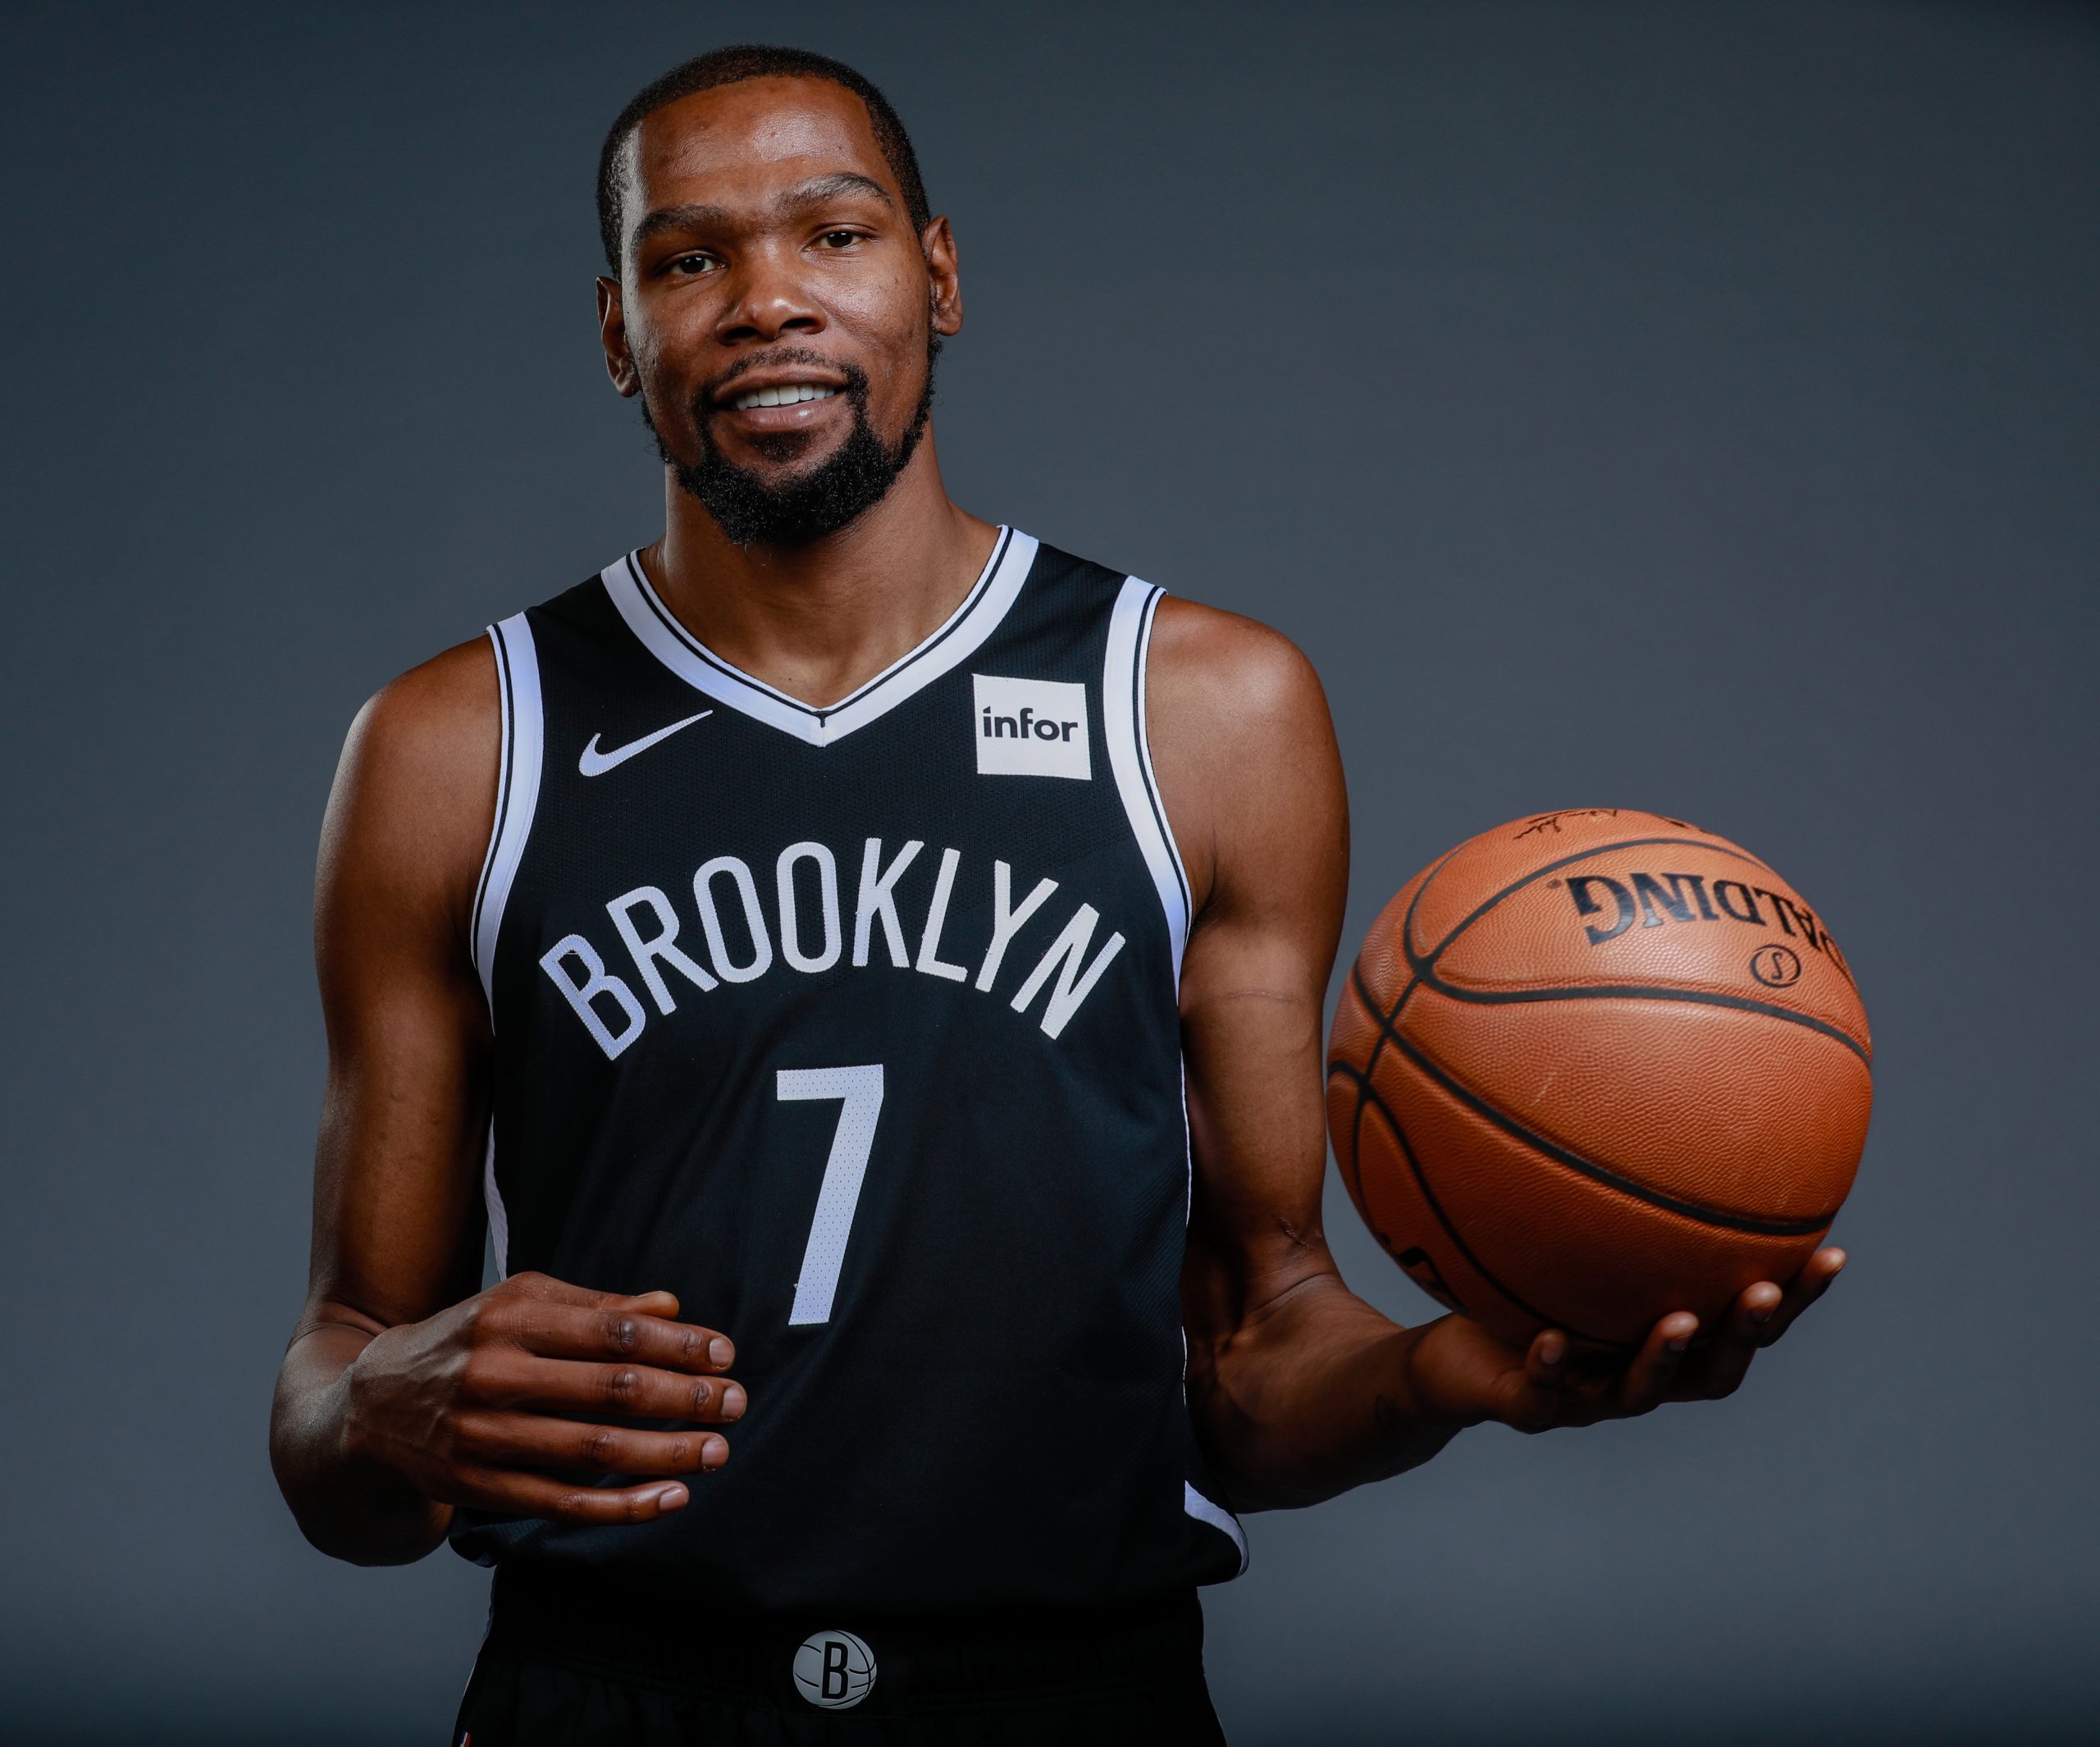 Report: Nets' Kevin Durant will not play this season after NBA